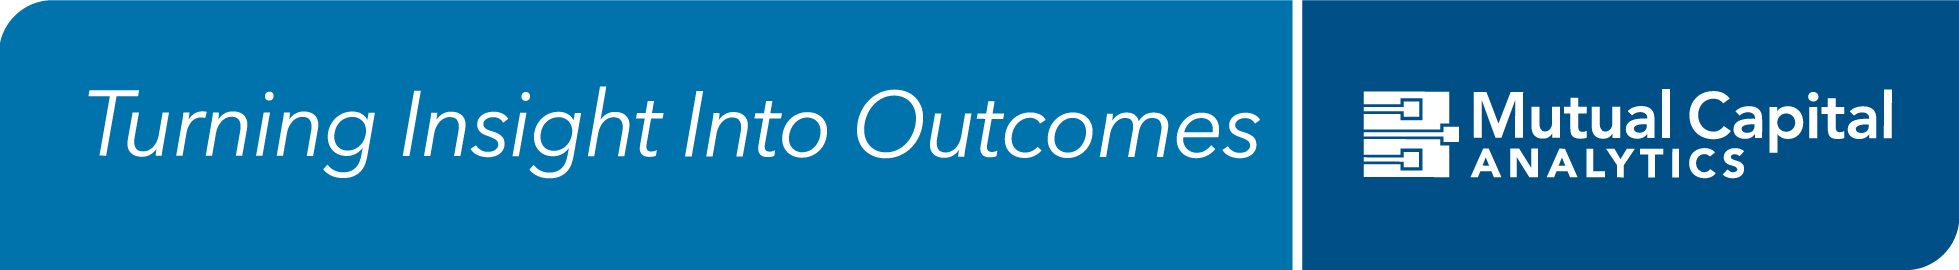 Turning Insights into Outcomes | Mutual Capital Analytics